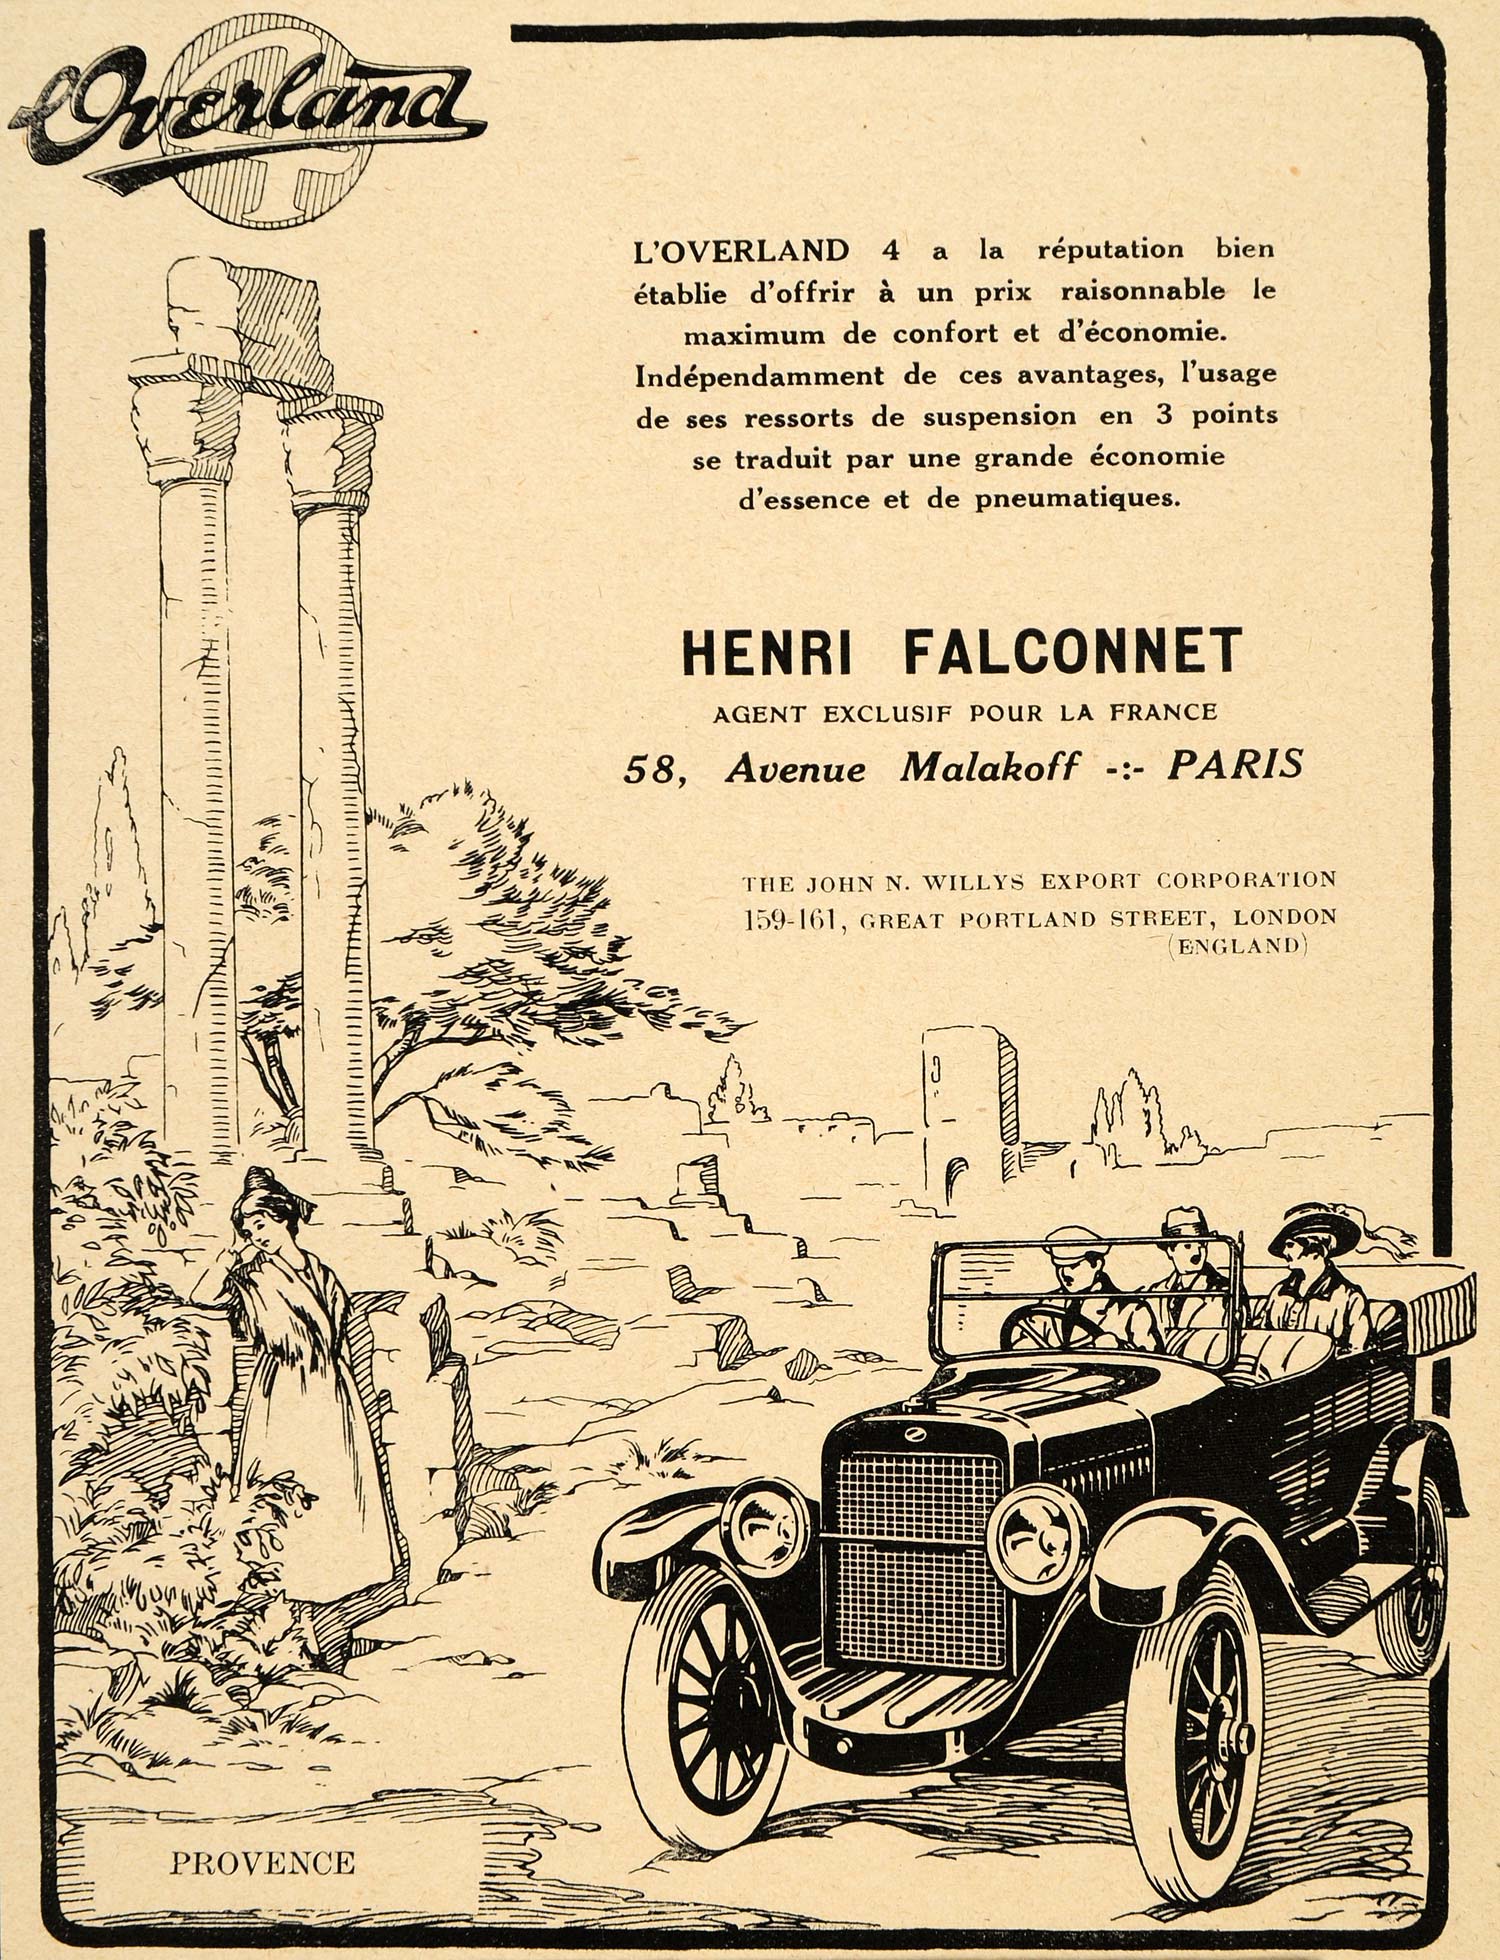 1920 Ad French Car Overland 4 Falconnet Drive Provence - ORIGINAL ILL3